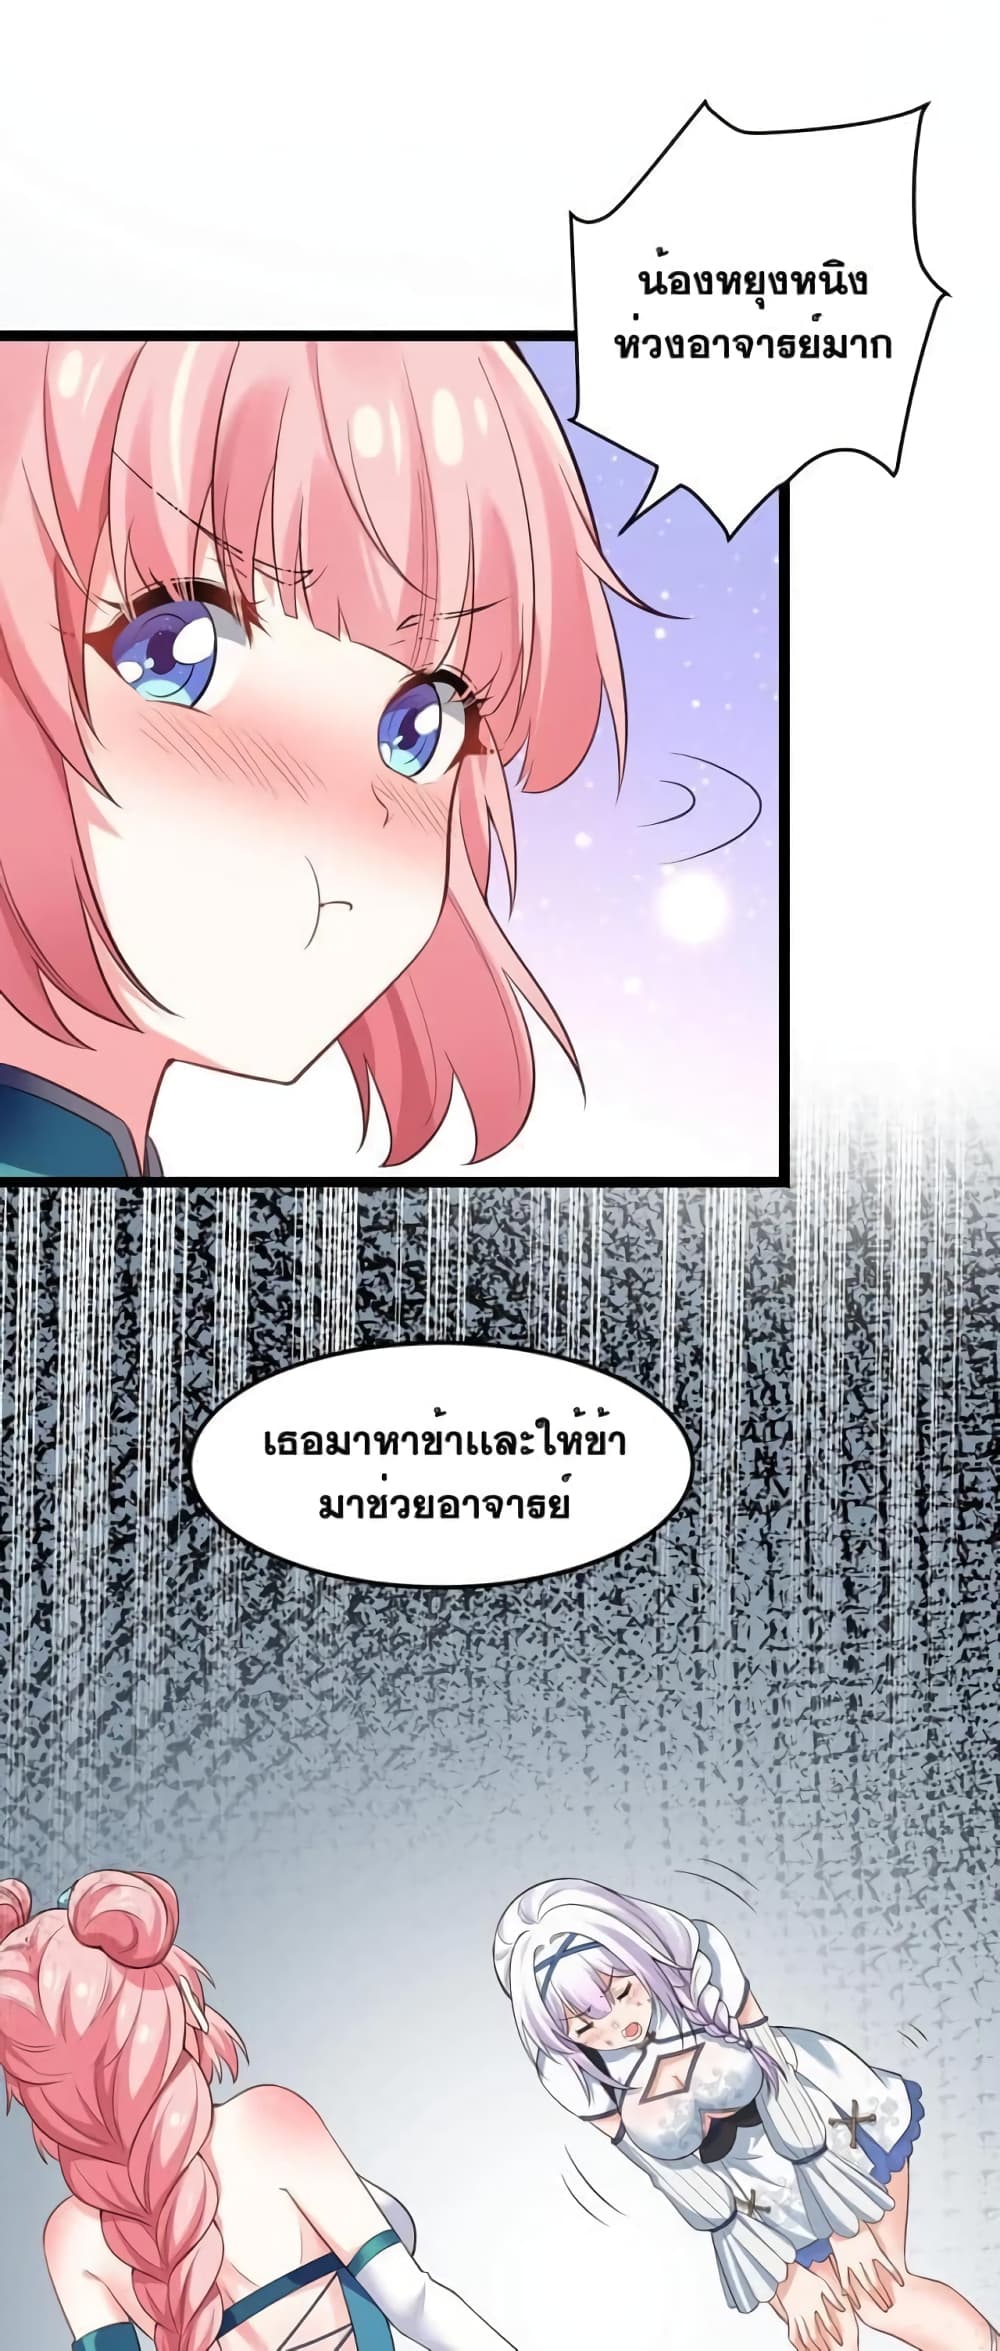 Godsian Masian from Another World ตอนที่ 105 (24)